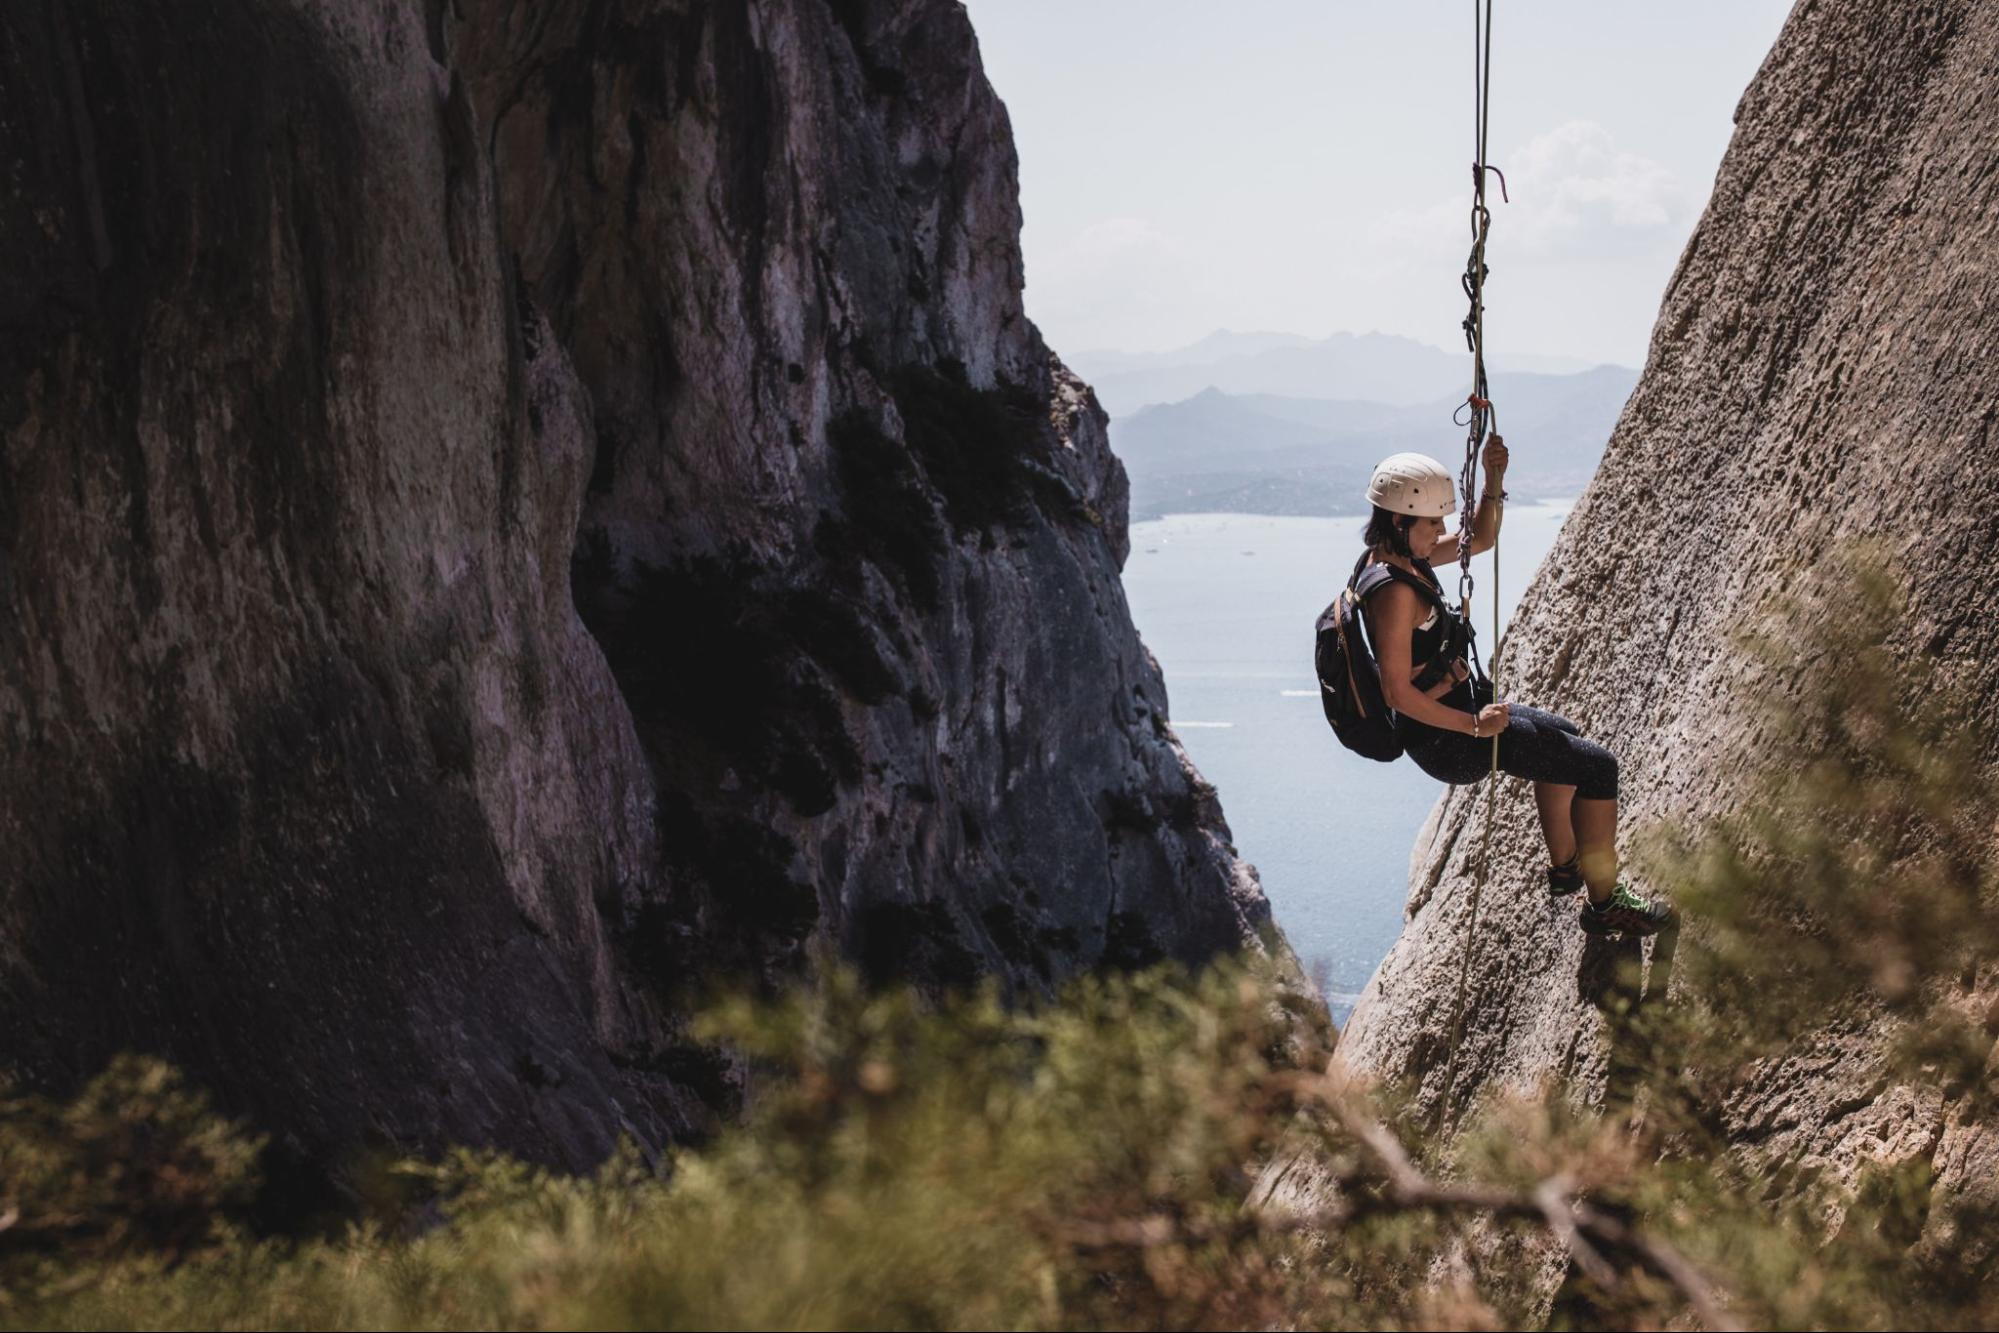 A woman is rappelling down a cliff